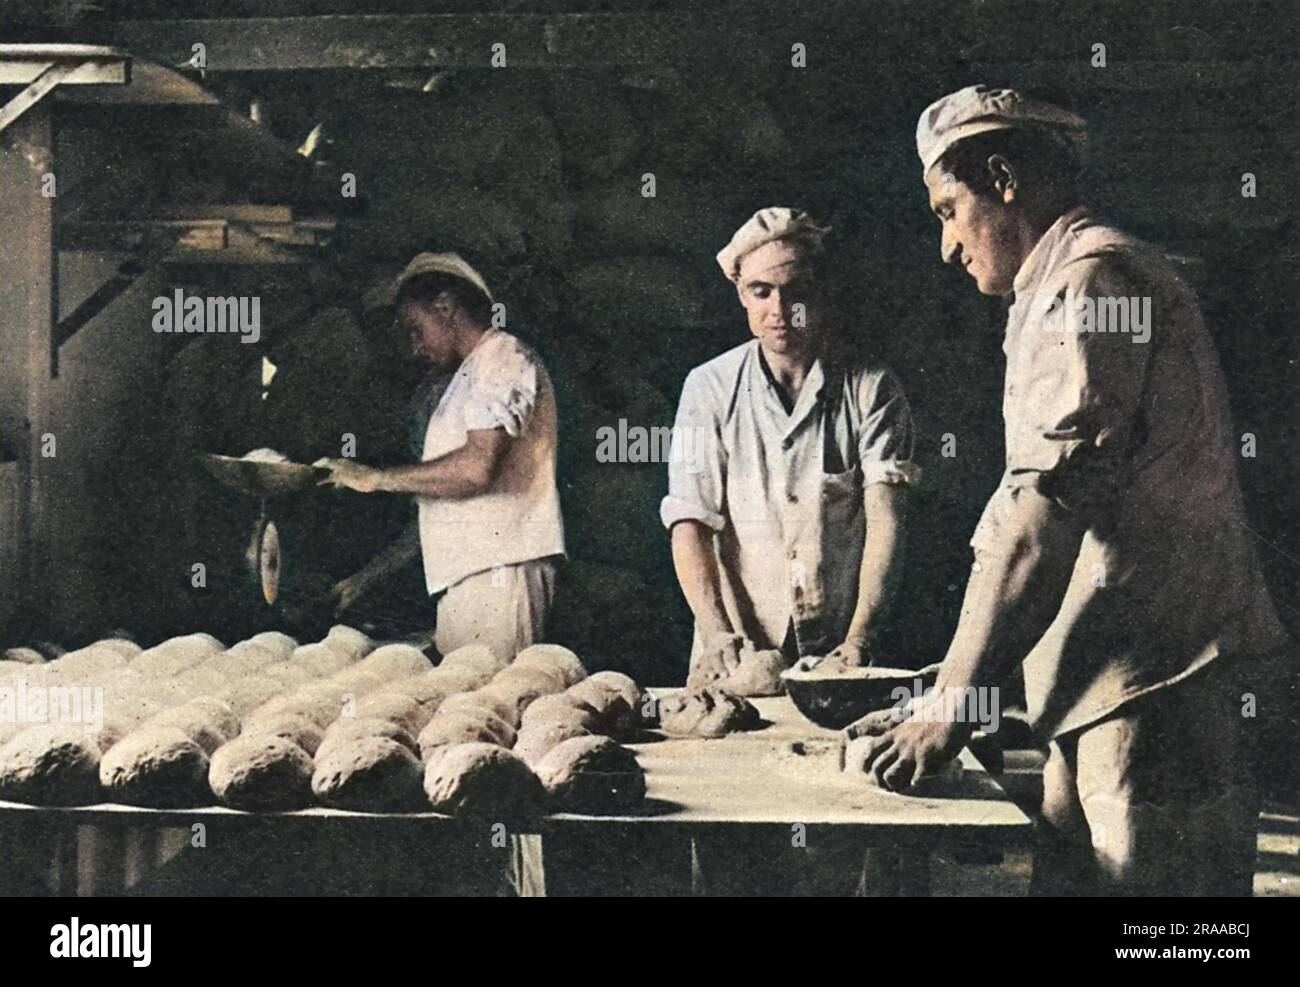 German prisoners in Britain post-World War Two. Rolling dough for the camp's bread, a highly skilled job performed by prisoners who were all bakers before the war, with excellent results. The ILN writes that the prisoners have only one real complaint - uncertainty, and that at the time of writing the British Government had not yet announced its future plans even though hostilities ceased over a year before.     Date: 1946 Stock Photo